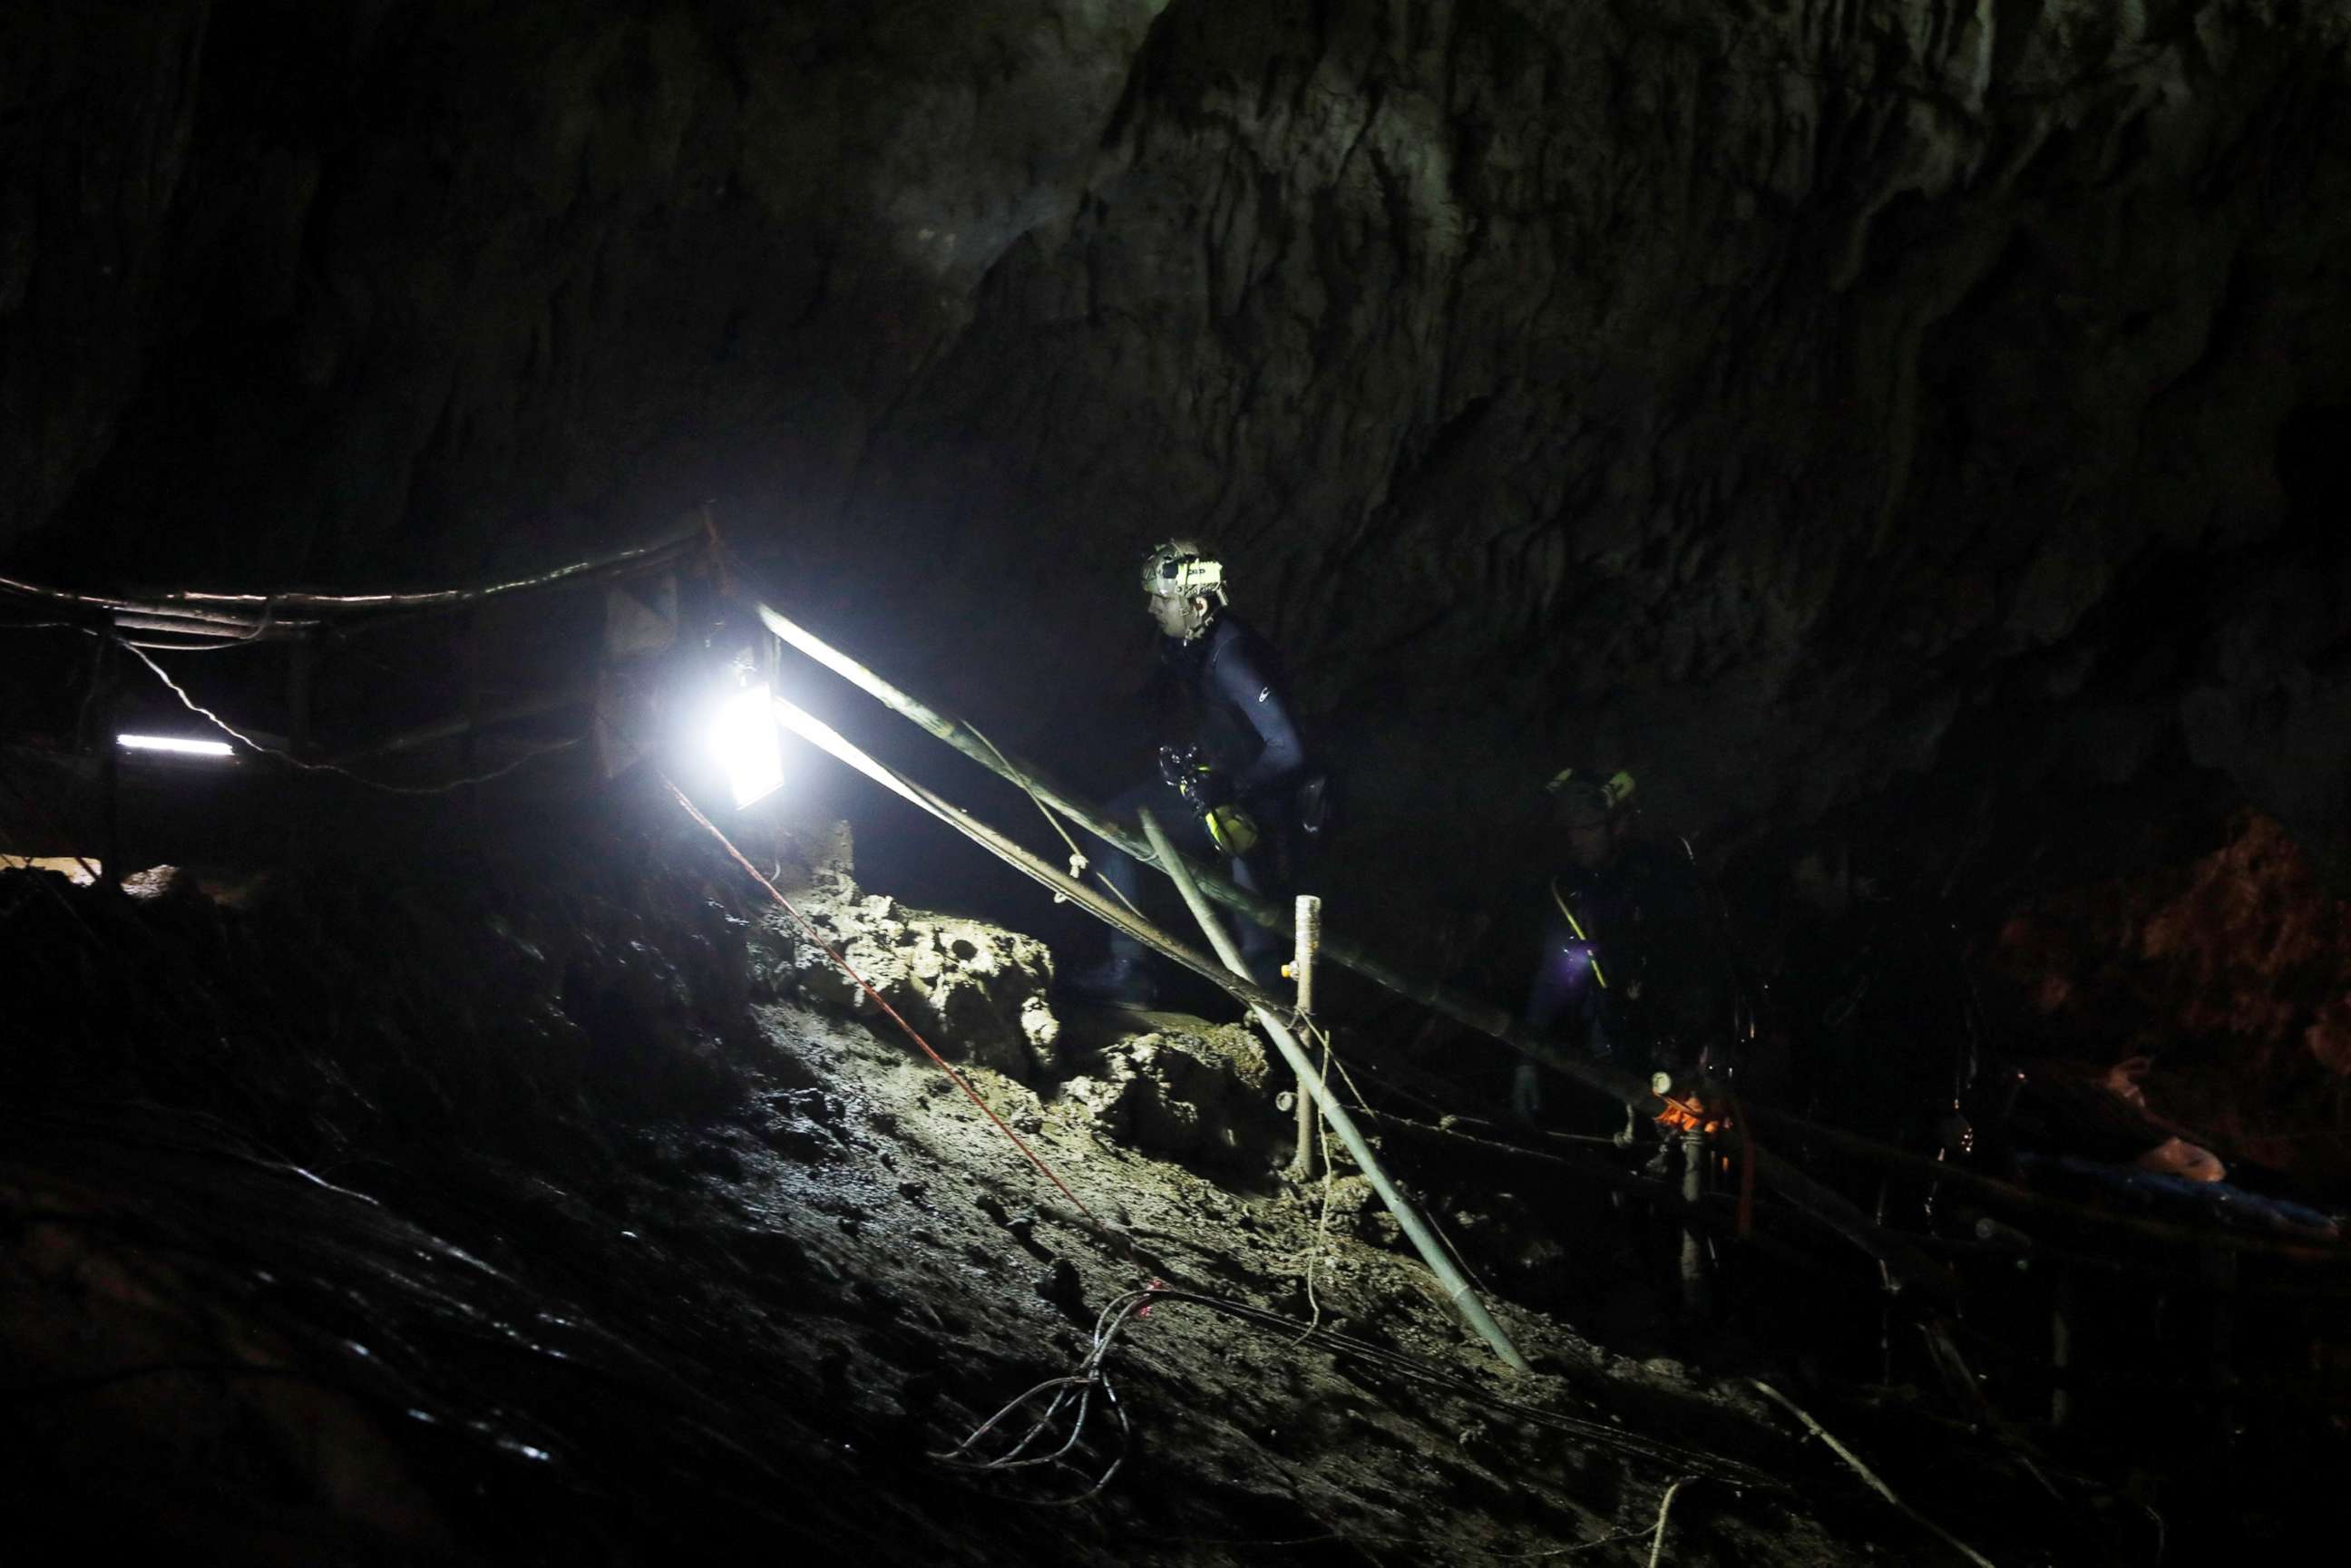 PHOTO: Divers walk inside Tham Luang cave complex, where 12 schoolboys and their soccer coach are trapped inside a flooded cave, in the northern province of Chiang Rai, Thailand, July 7, 2018.